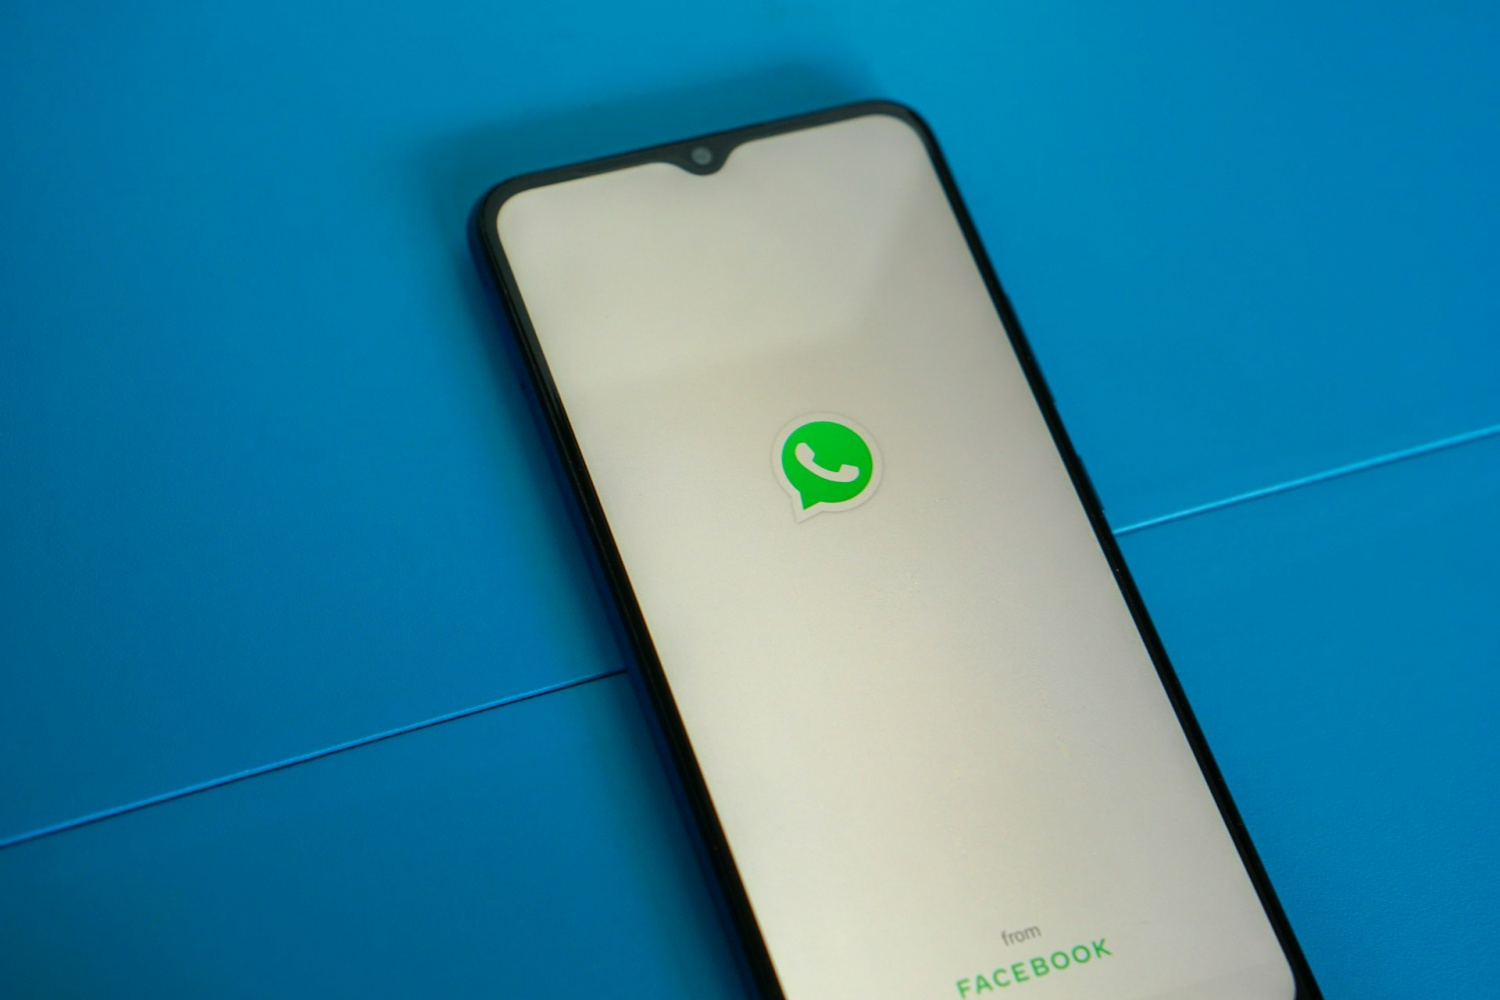 This WhatsApp Update Will Allow You to View Your Friends' Stories You Haven't Yet Seen